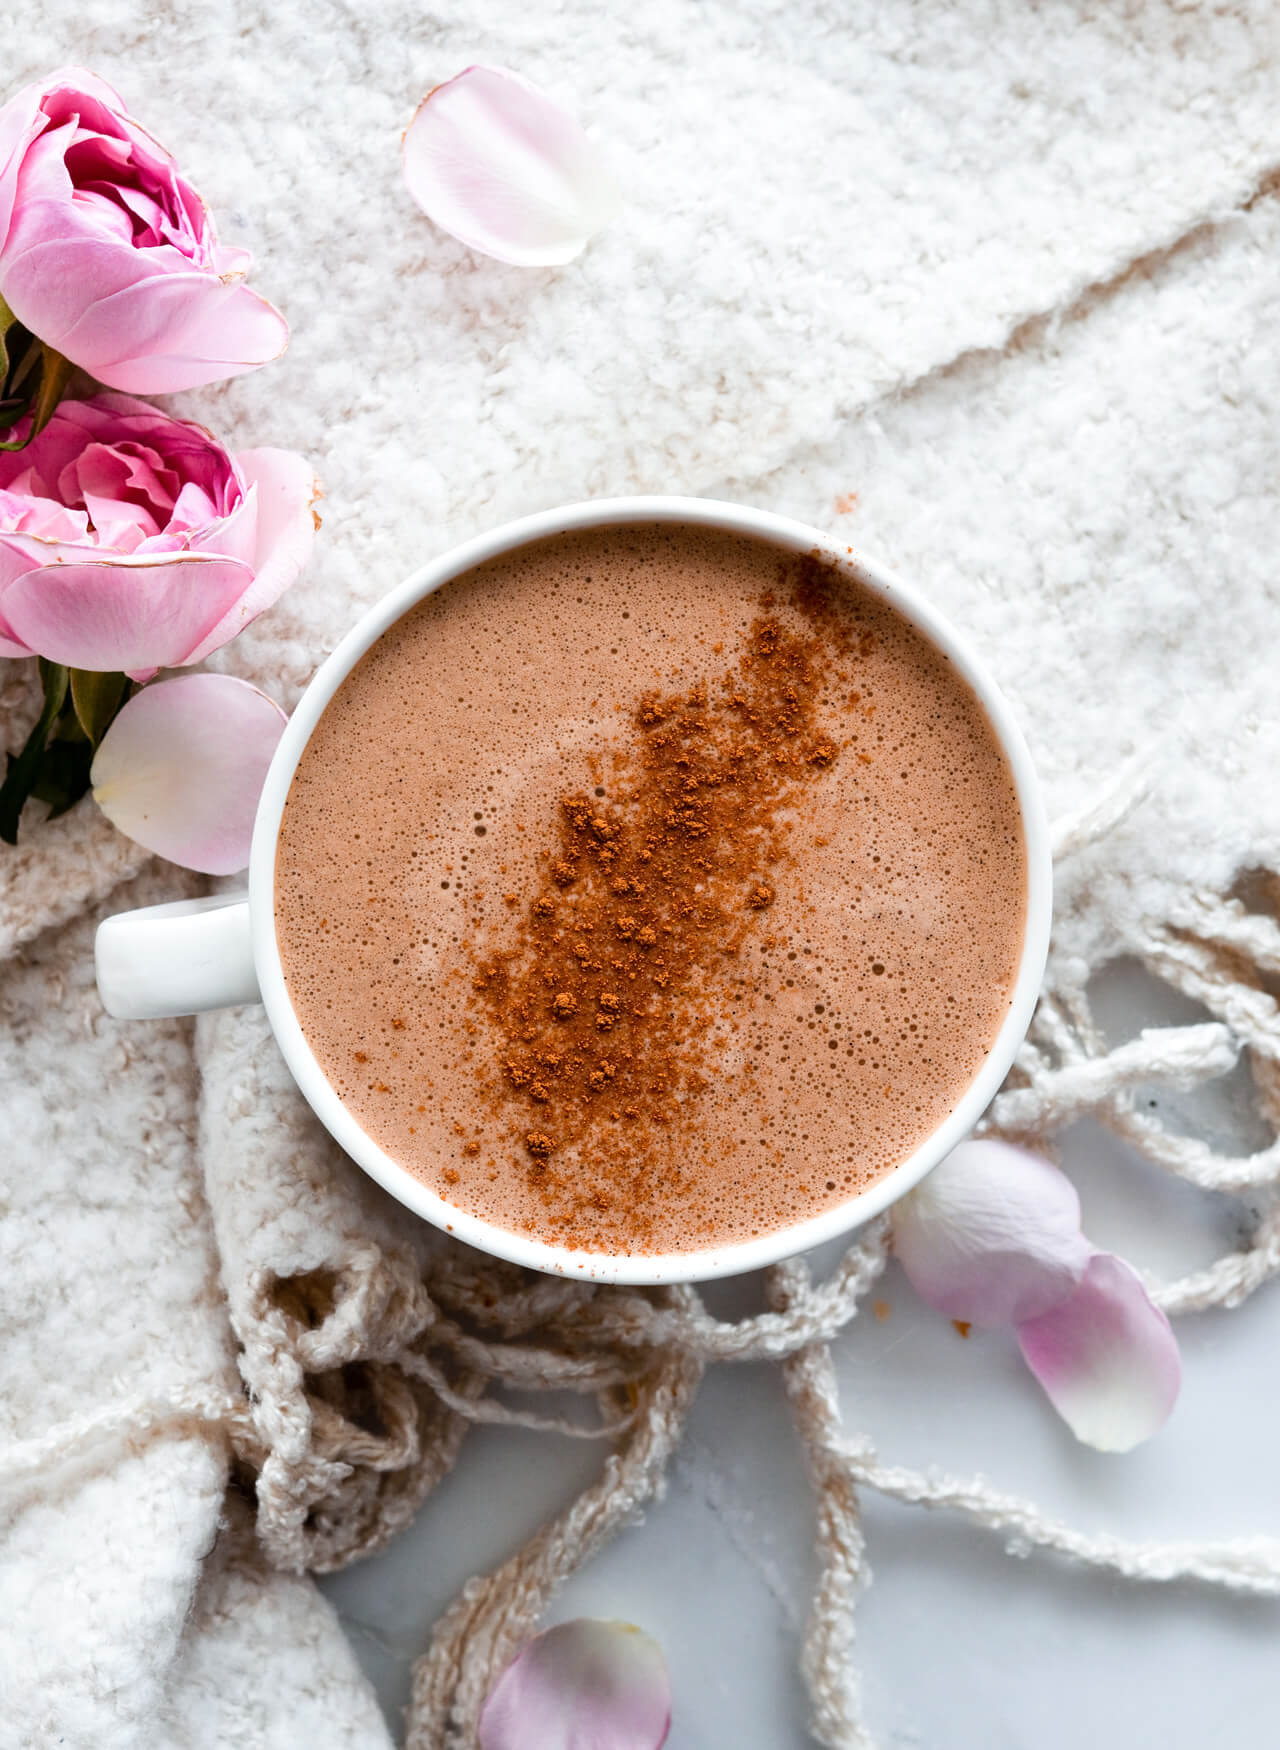 Add protein powder to coffee and make this hot chocolate protein coffee. Gives you a boost of energy and makes a perfect breakfast or snack addition.